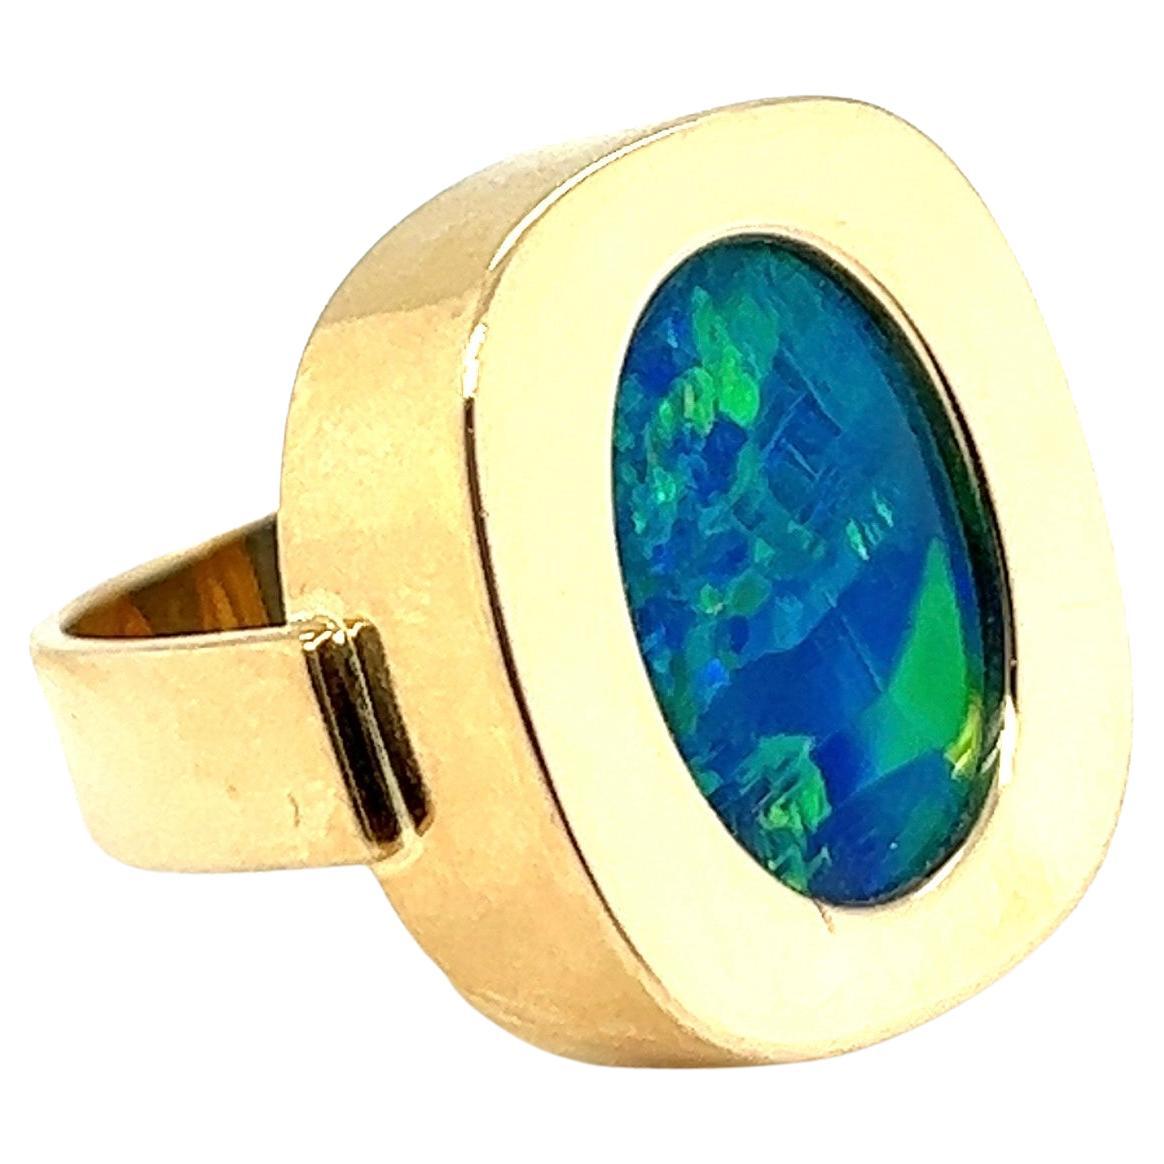 Fabulous 18 karat yellow gold and opal Cocktail ring, 1970s.

Crafted in 18 karat polished yellow gold, the cushion-shaped ring head set with a beautiful oval opal doublet of circa 1.4 x 1.0 cm / 0.55 x 0.39 in. The opal displays a very lively blue